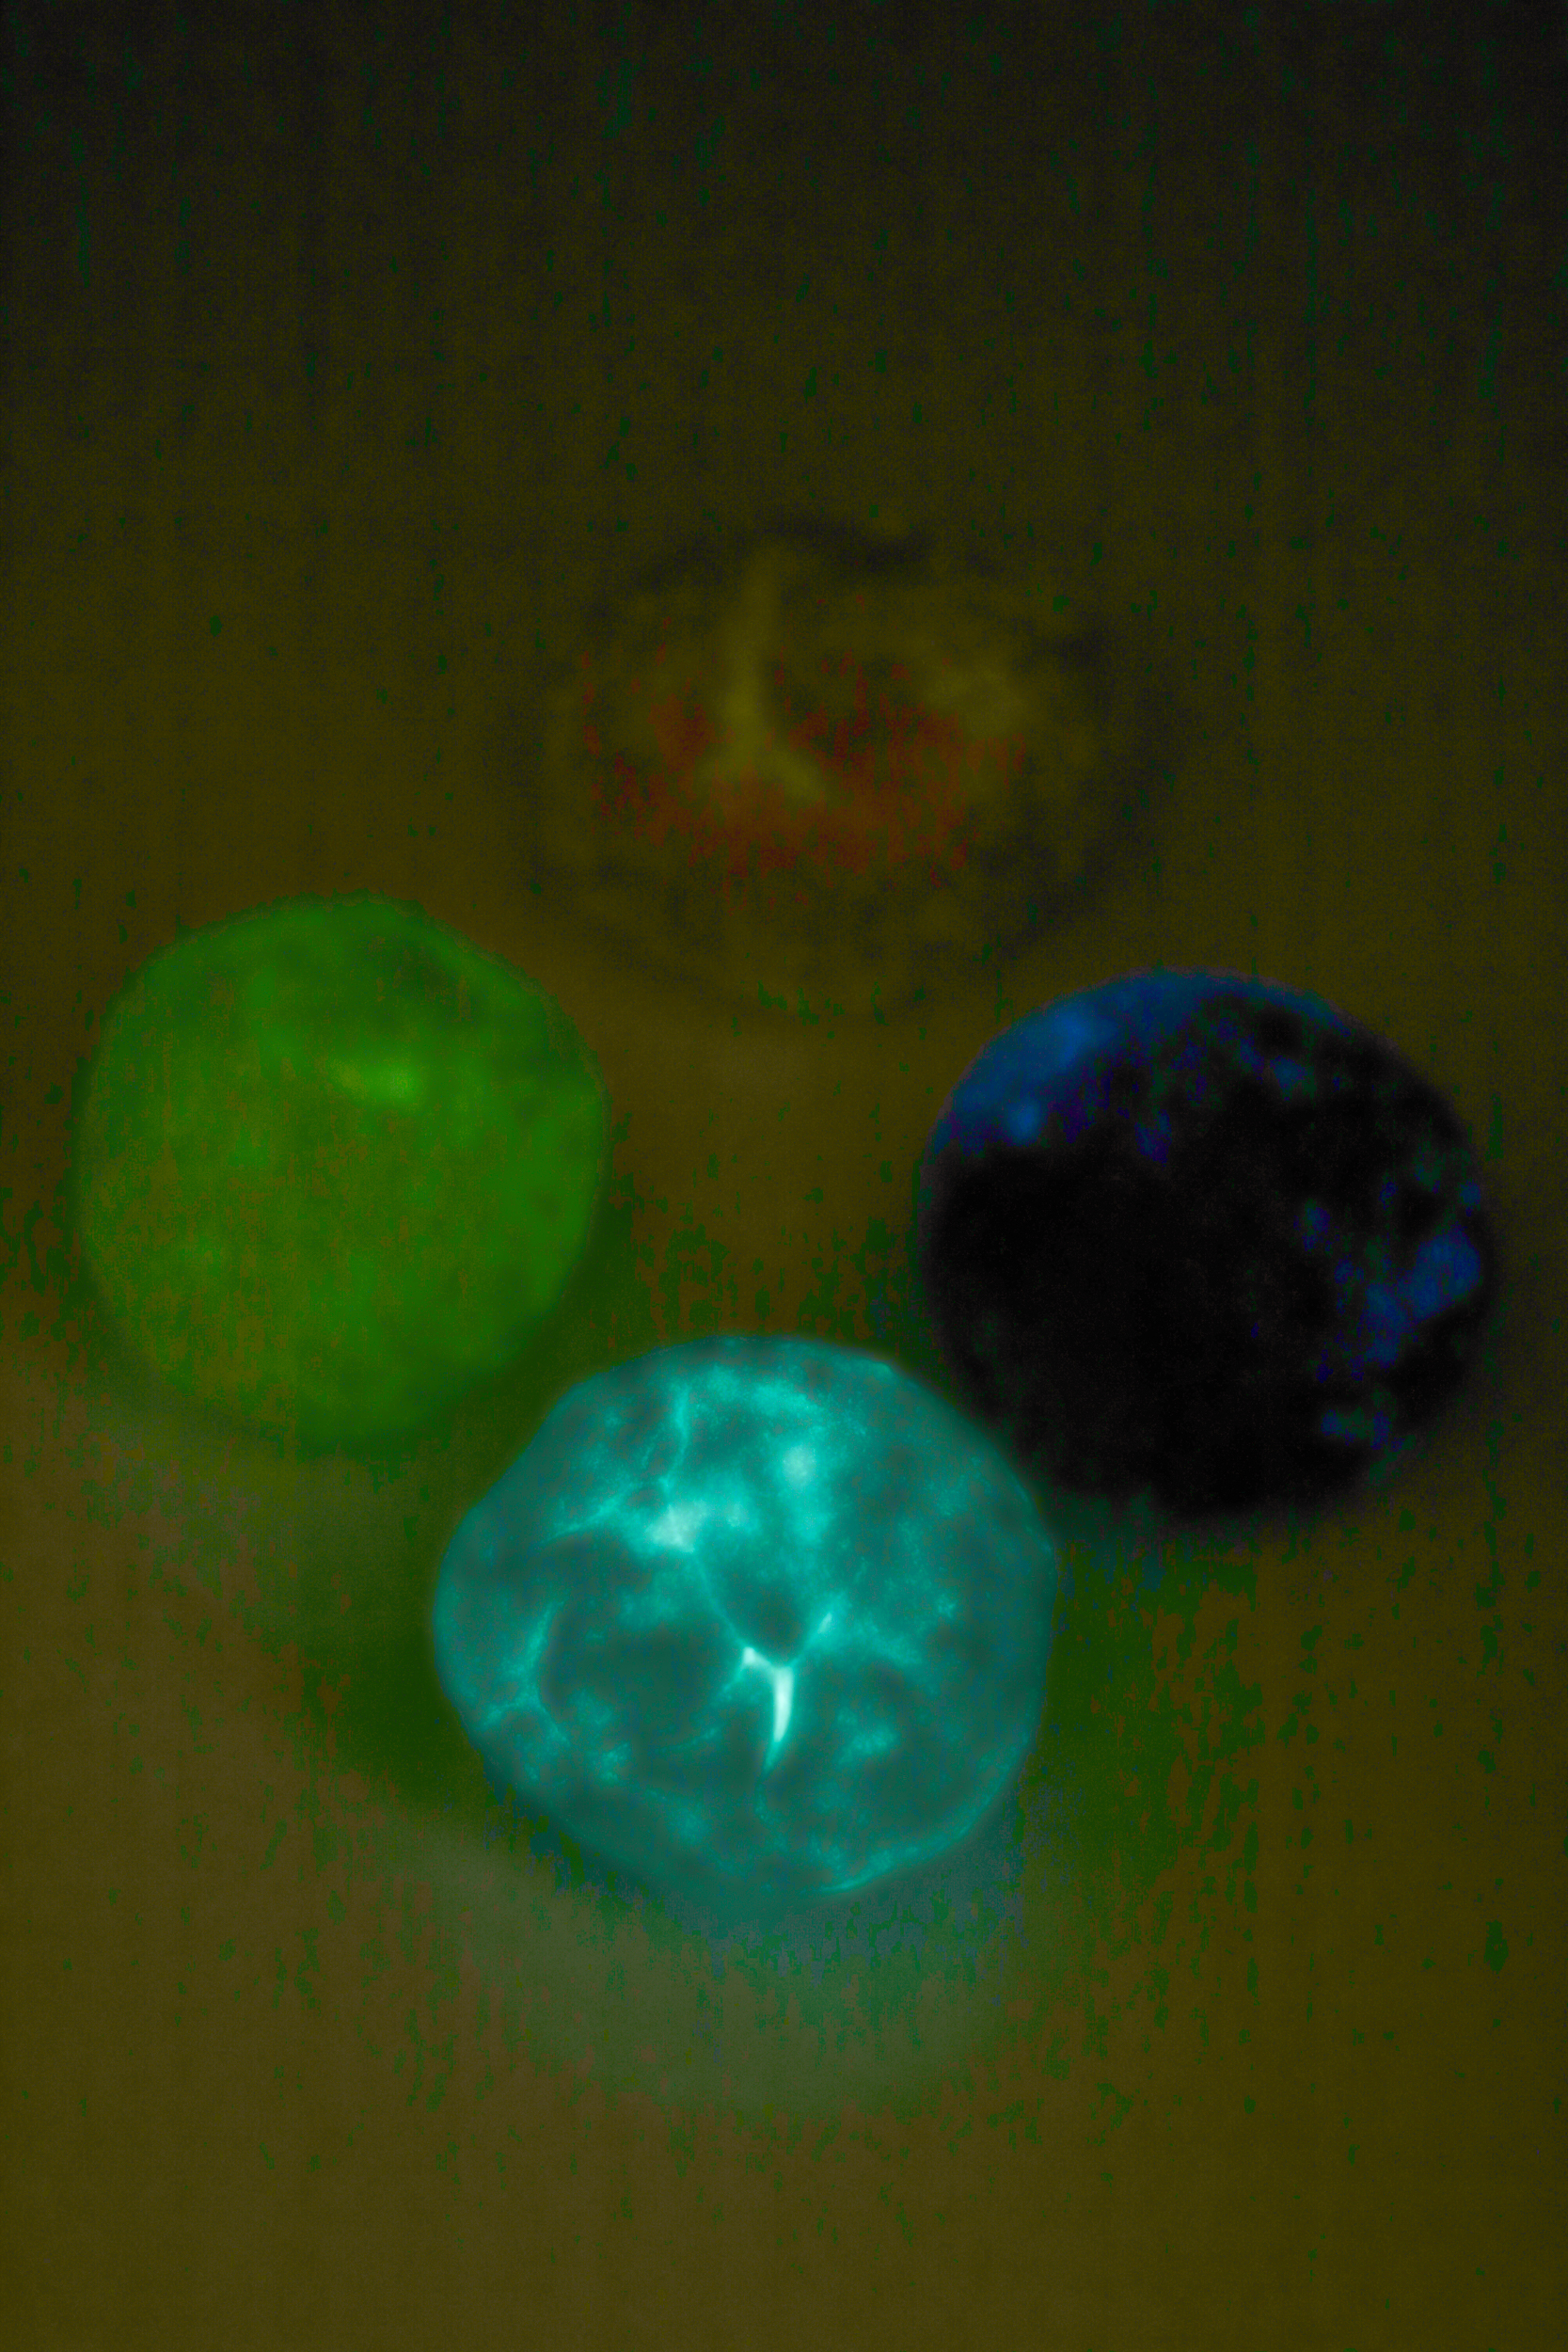 Close up of the glow in the dark balls.